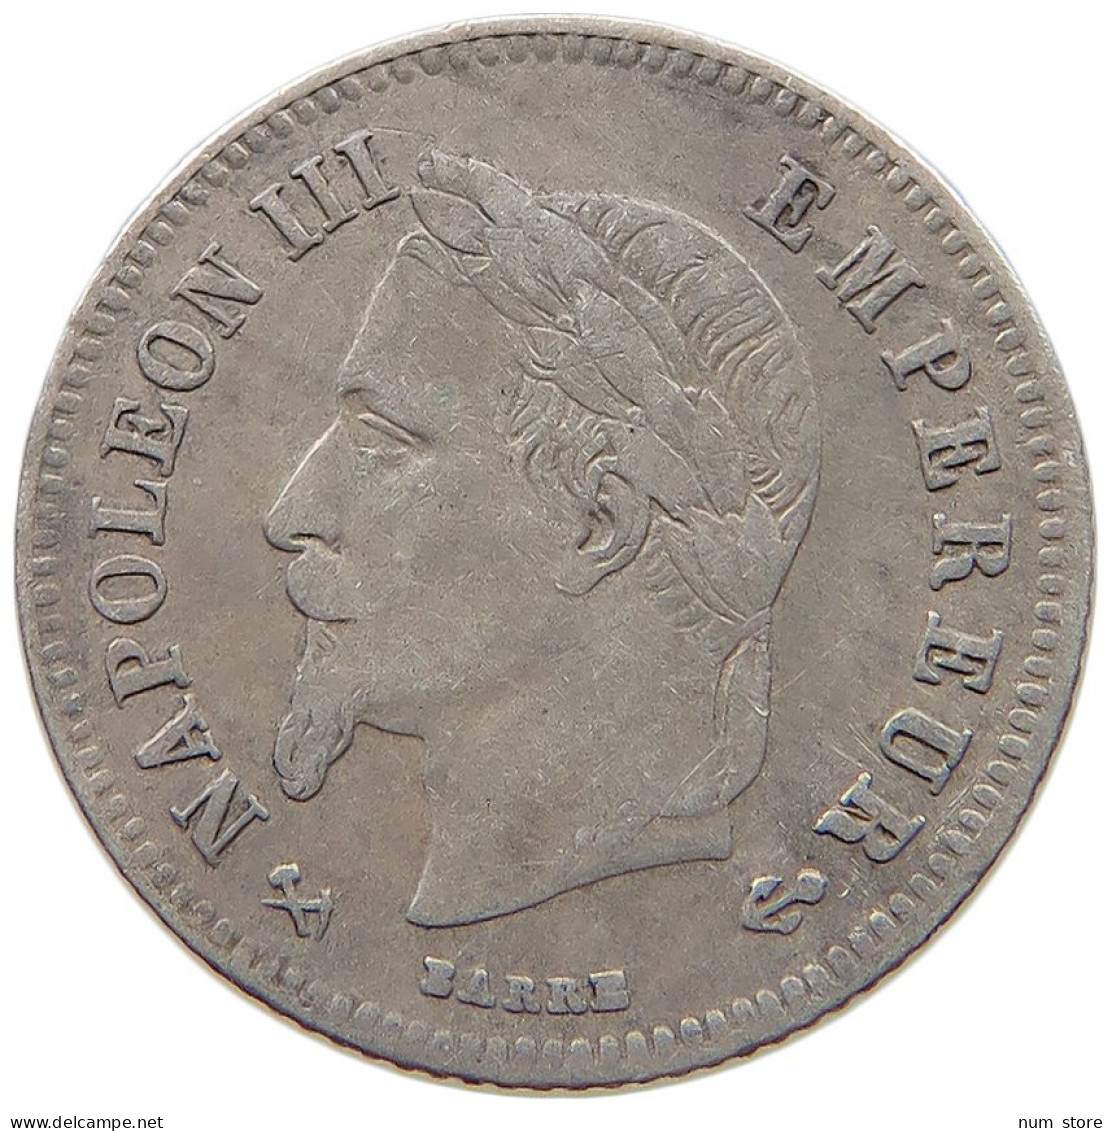 FRANCE 20 CENTIMES 1866 K Napoleon III. (1852-1870) #t112 1403 - 20 Centimes